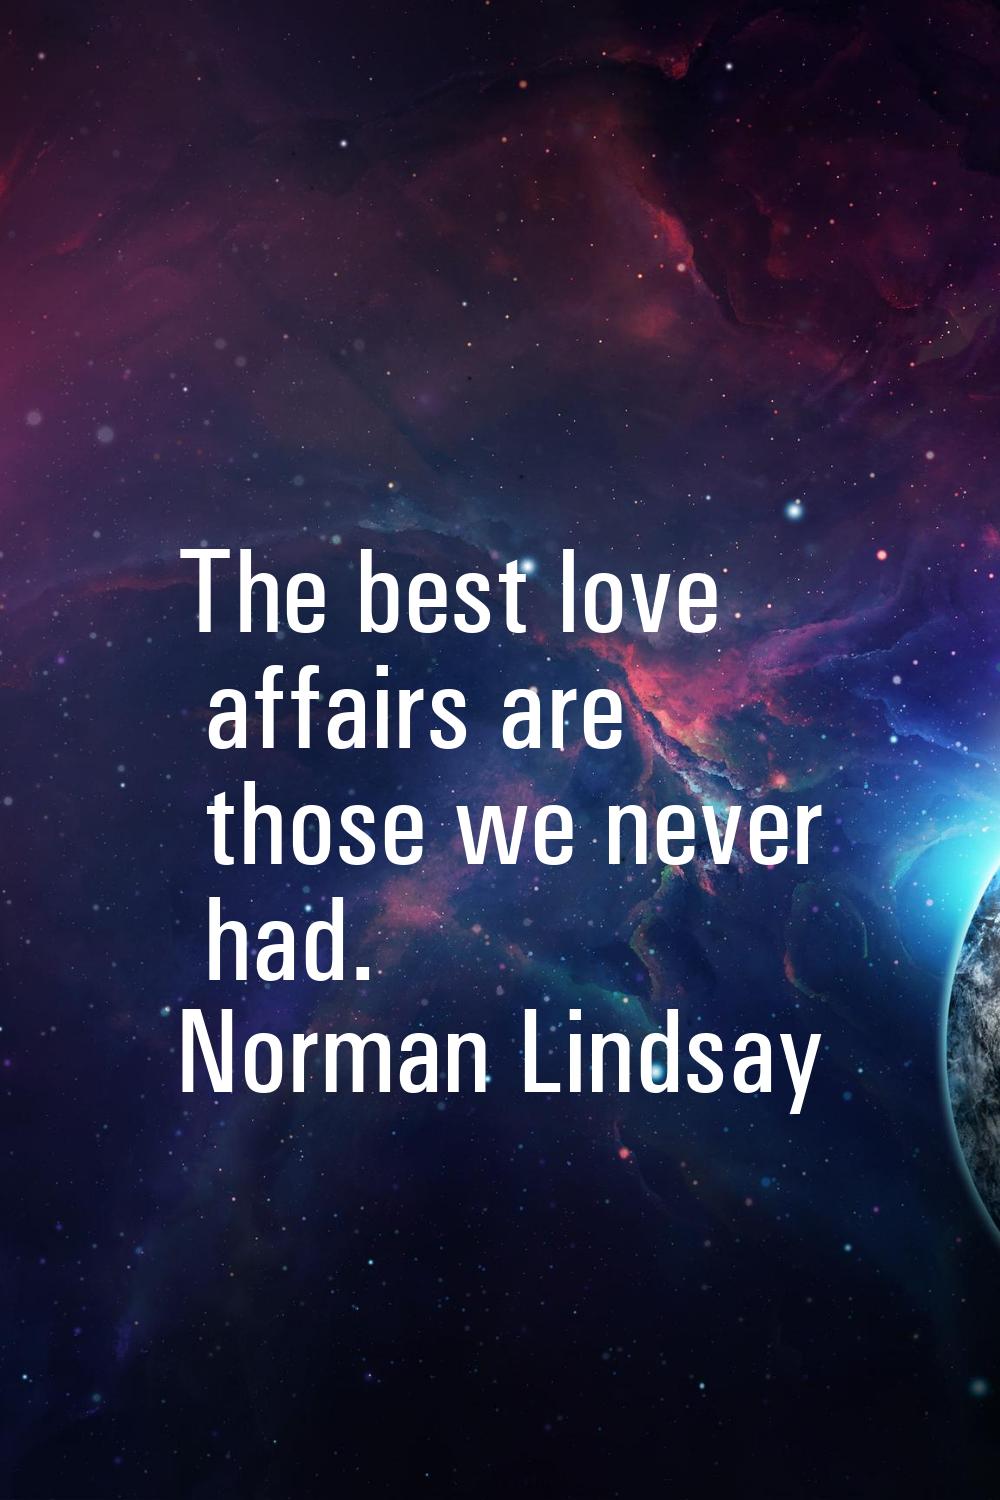 The best love affairs are those we never had.